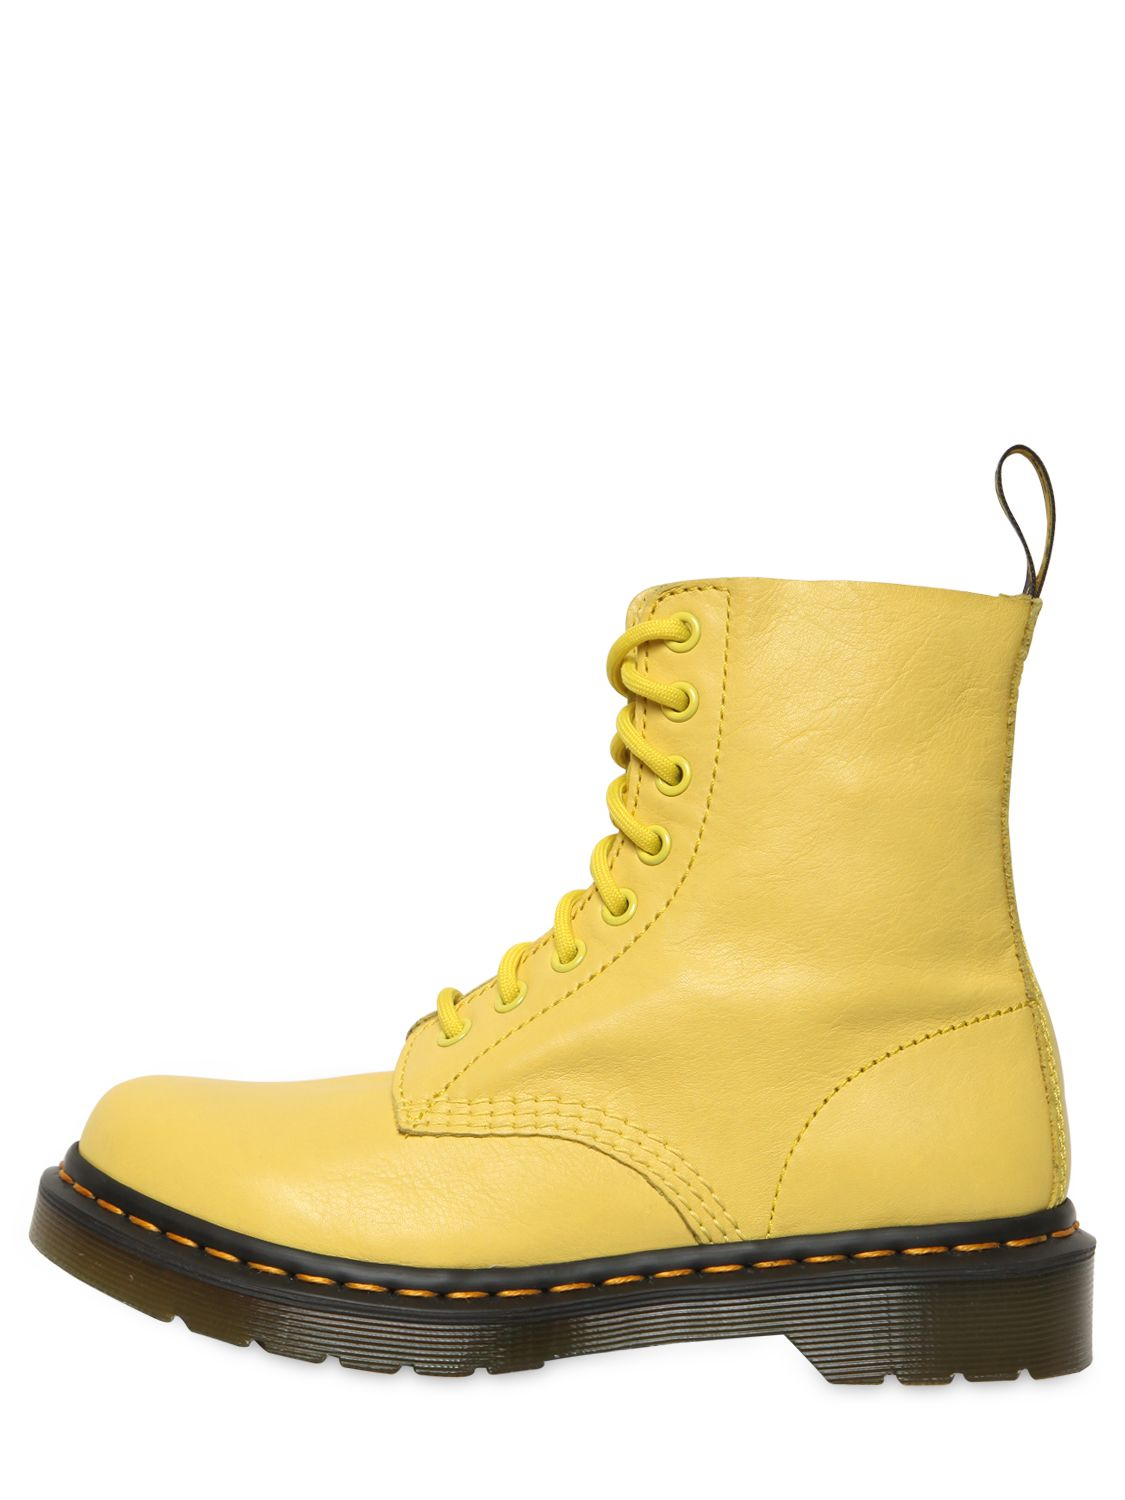 Dr. Martens 30mm Core Pascal Soft Leather Boots in Yellow - Lyst